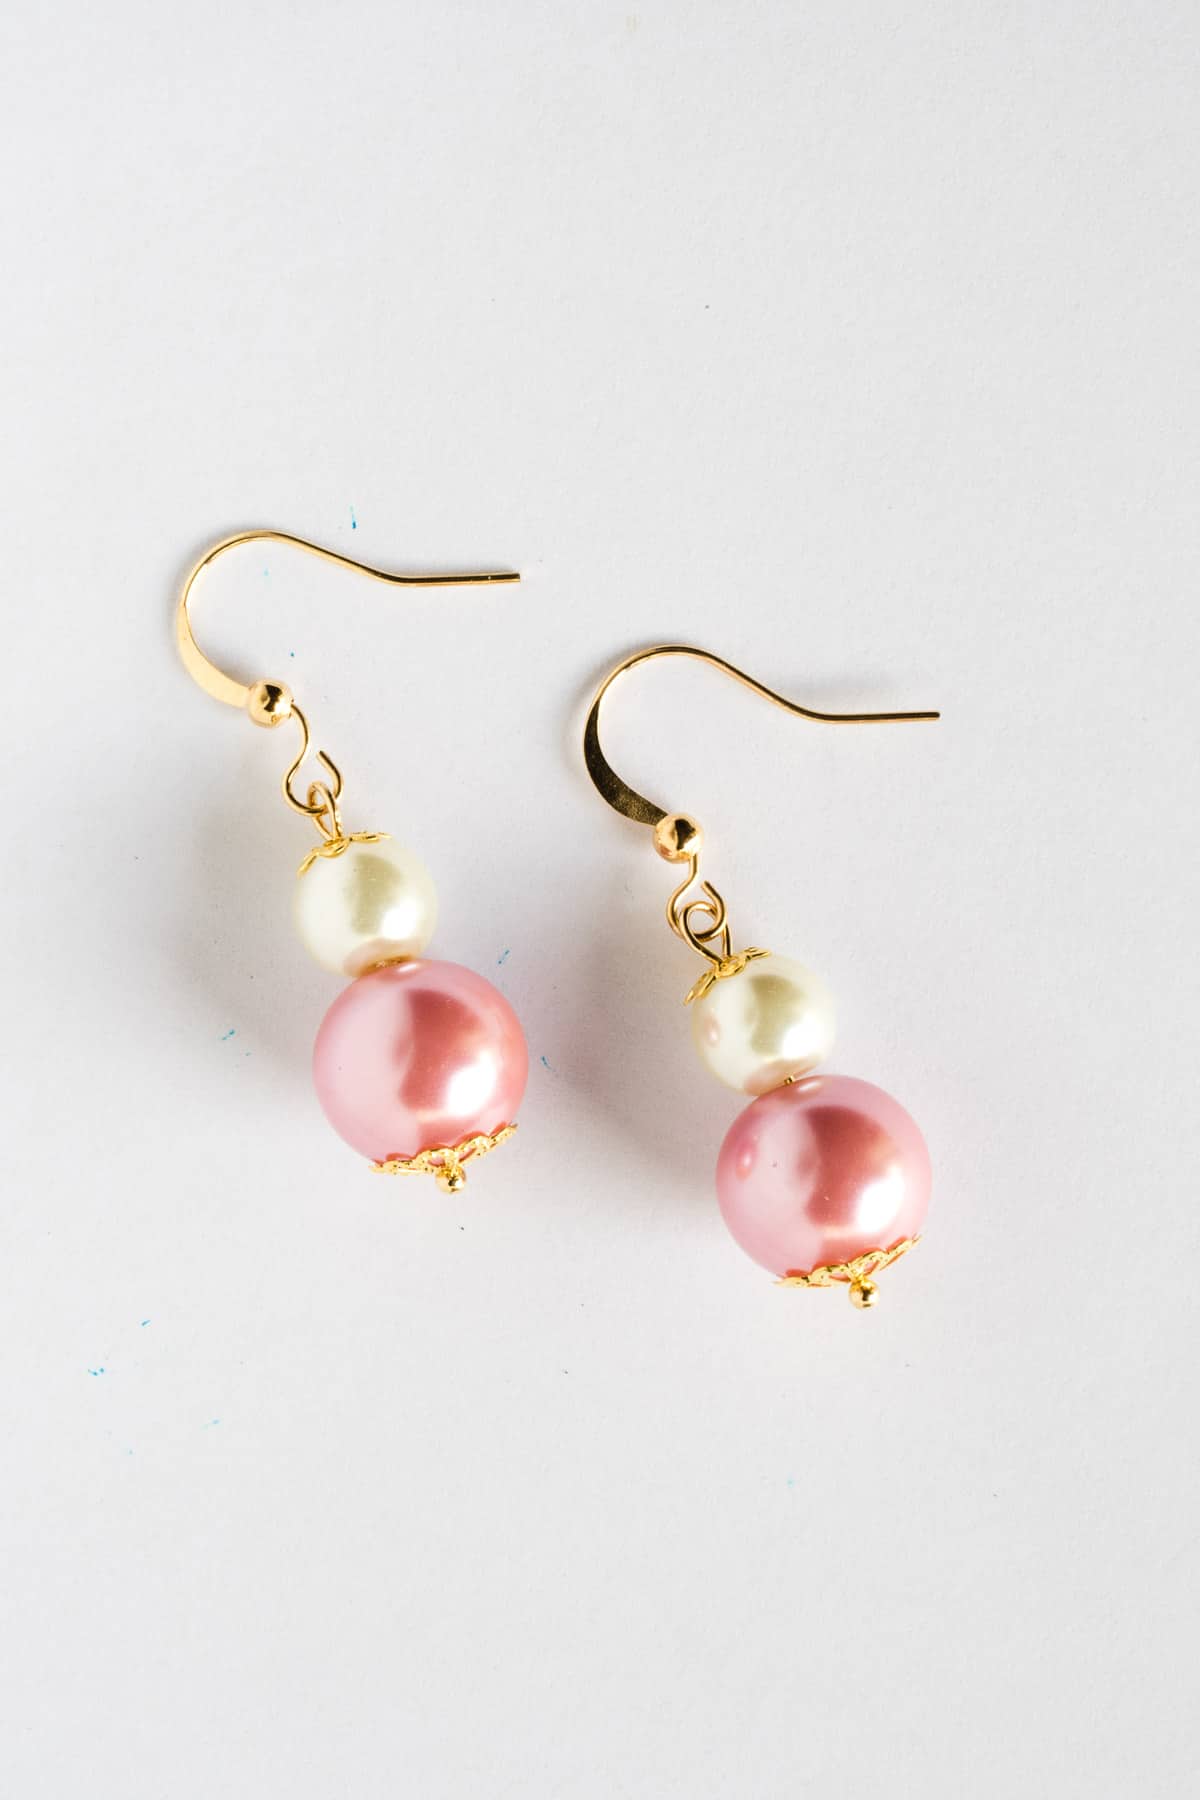 A pair of white and pink earrings.